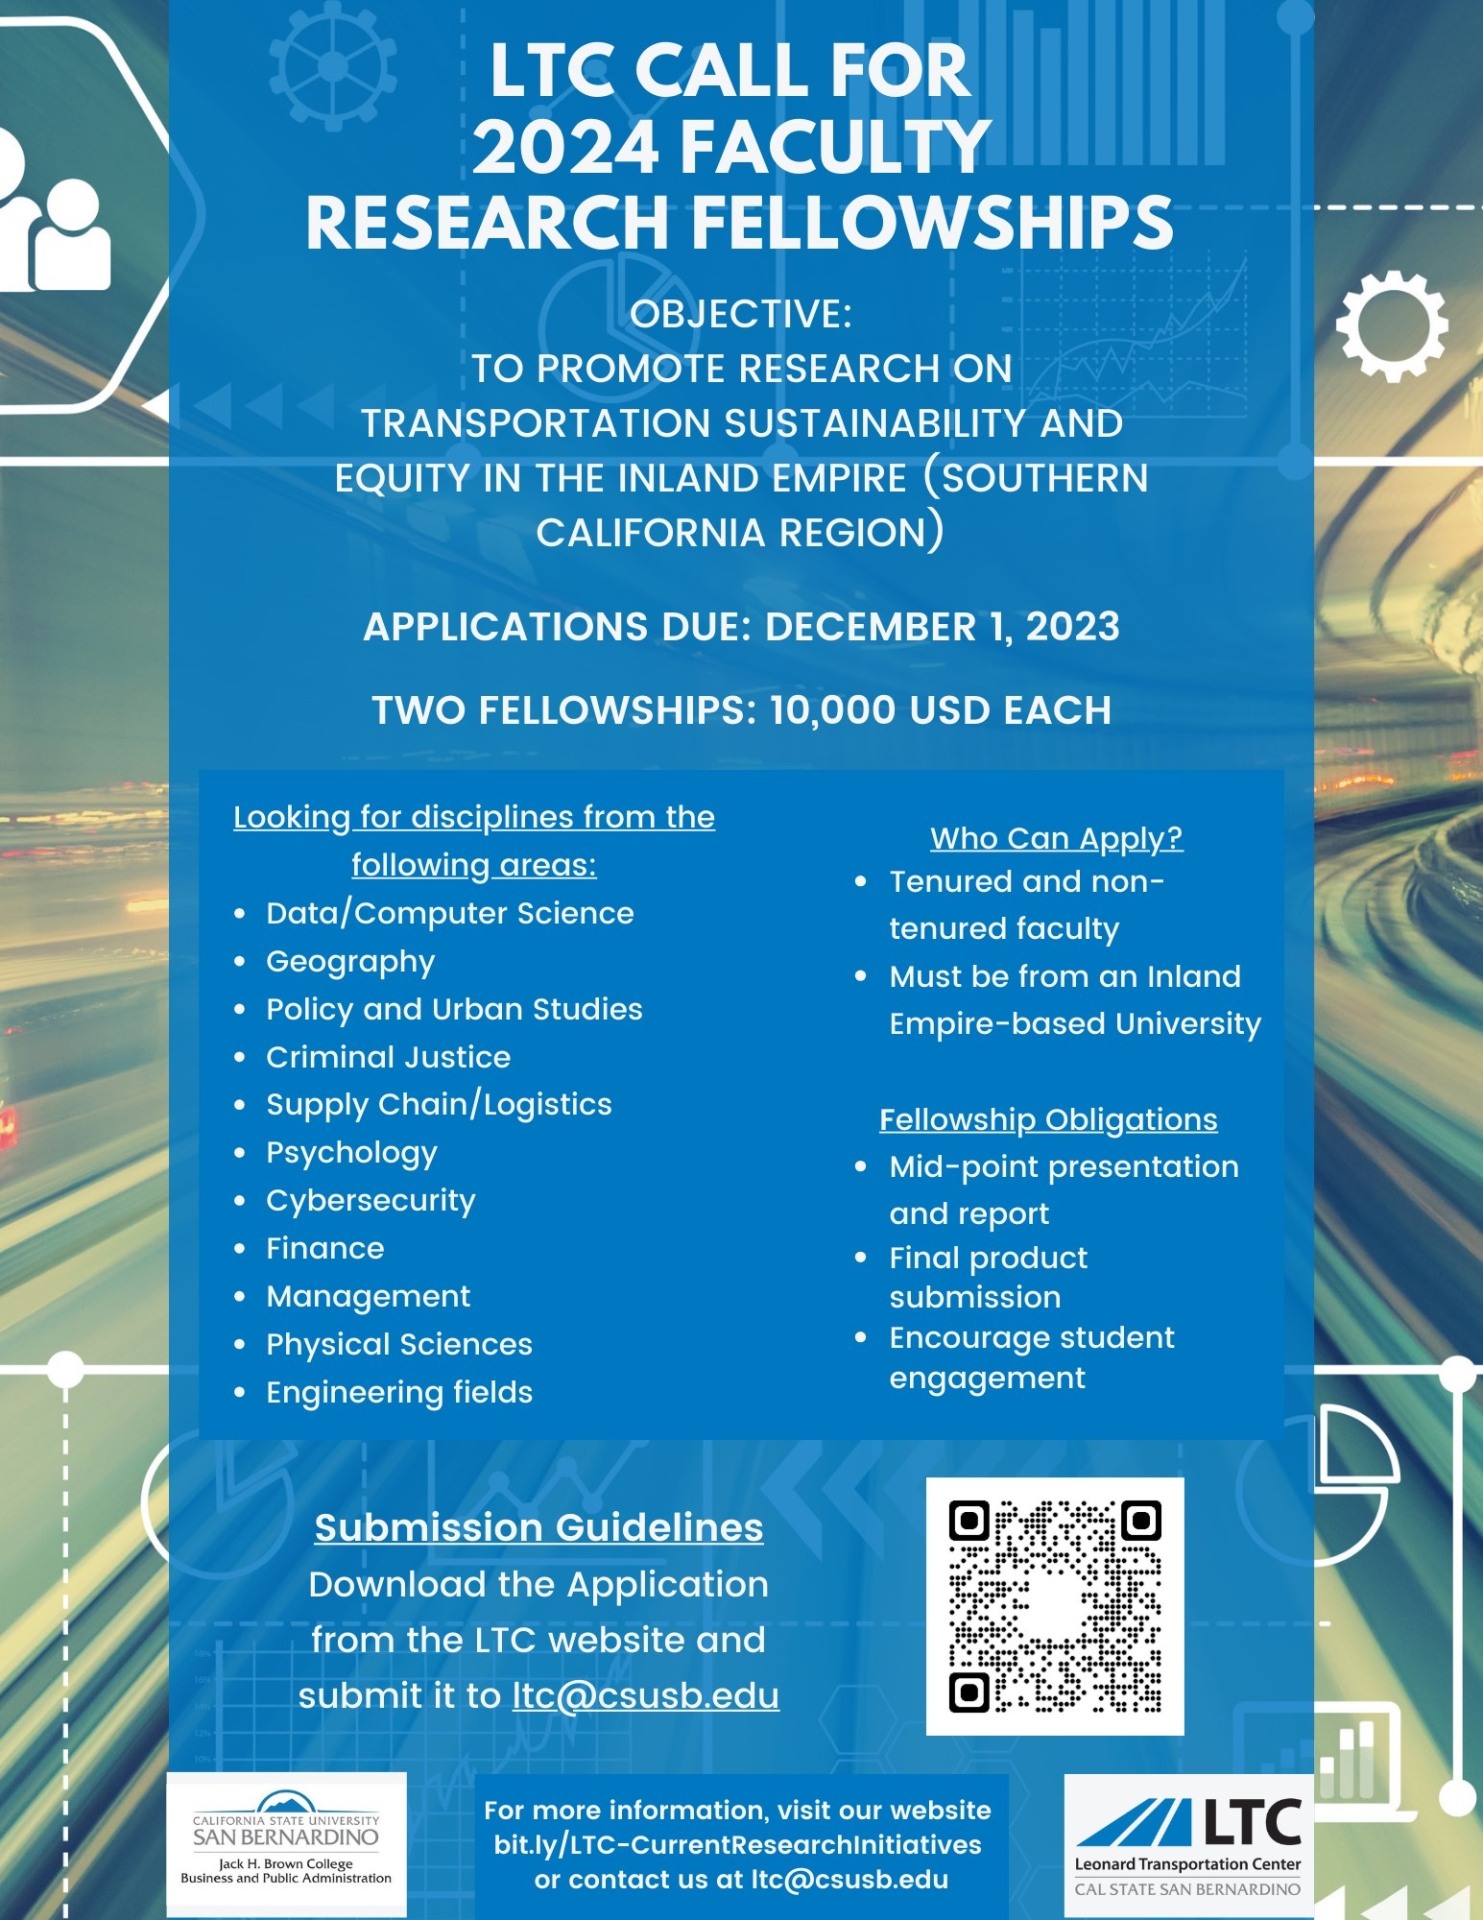 LTC Call For 2024 Faculty Research Fellowships